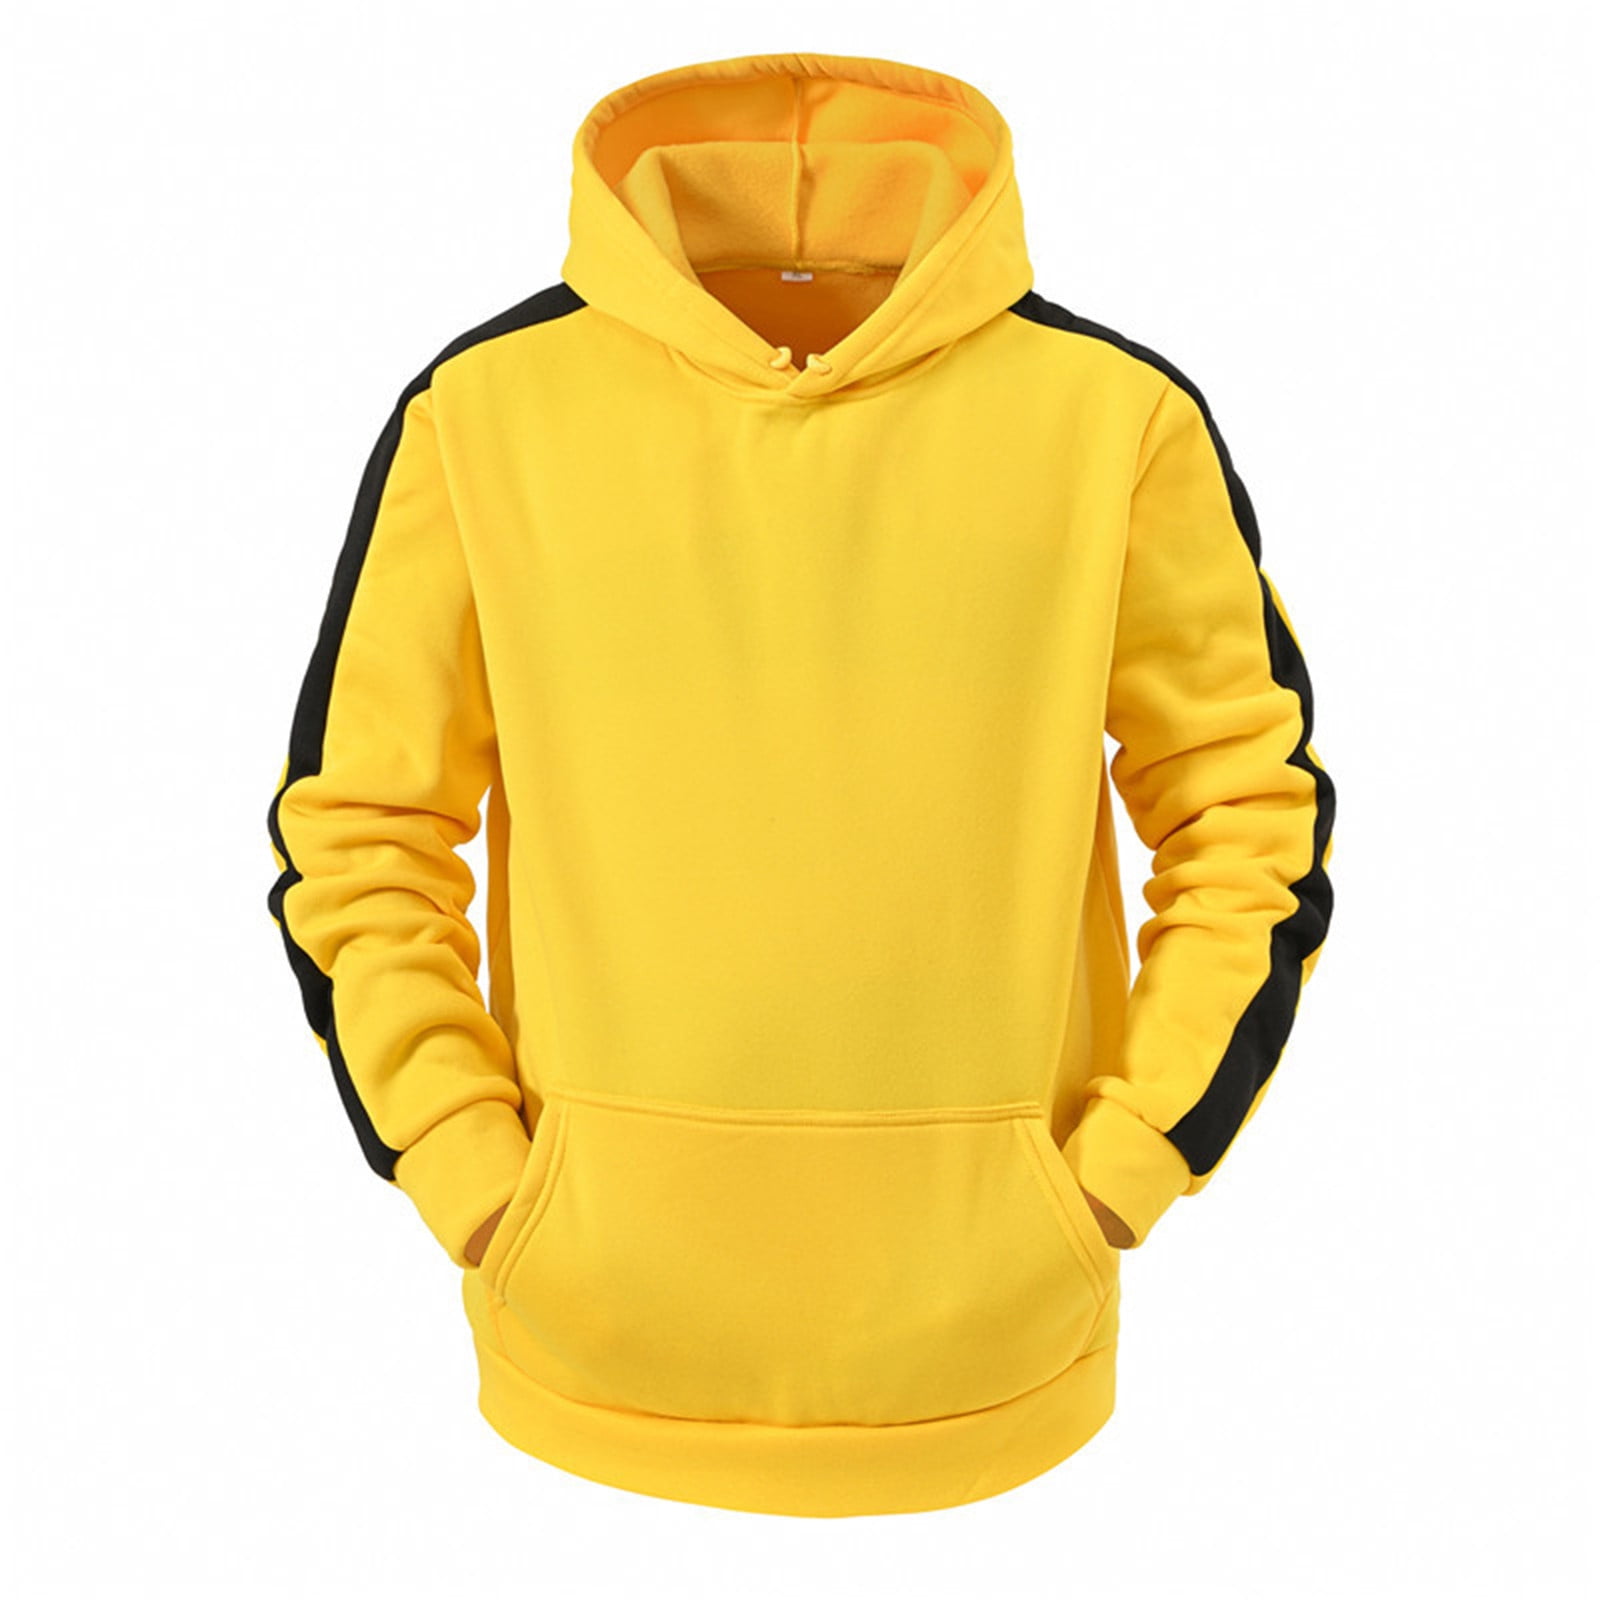 LEEy-world Hoodies for Men Men's Workout Long Sleeve Fishing Shirts UPF 50+  Sun Protection Dry Fit Hoodies Yellow,XXL 